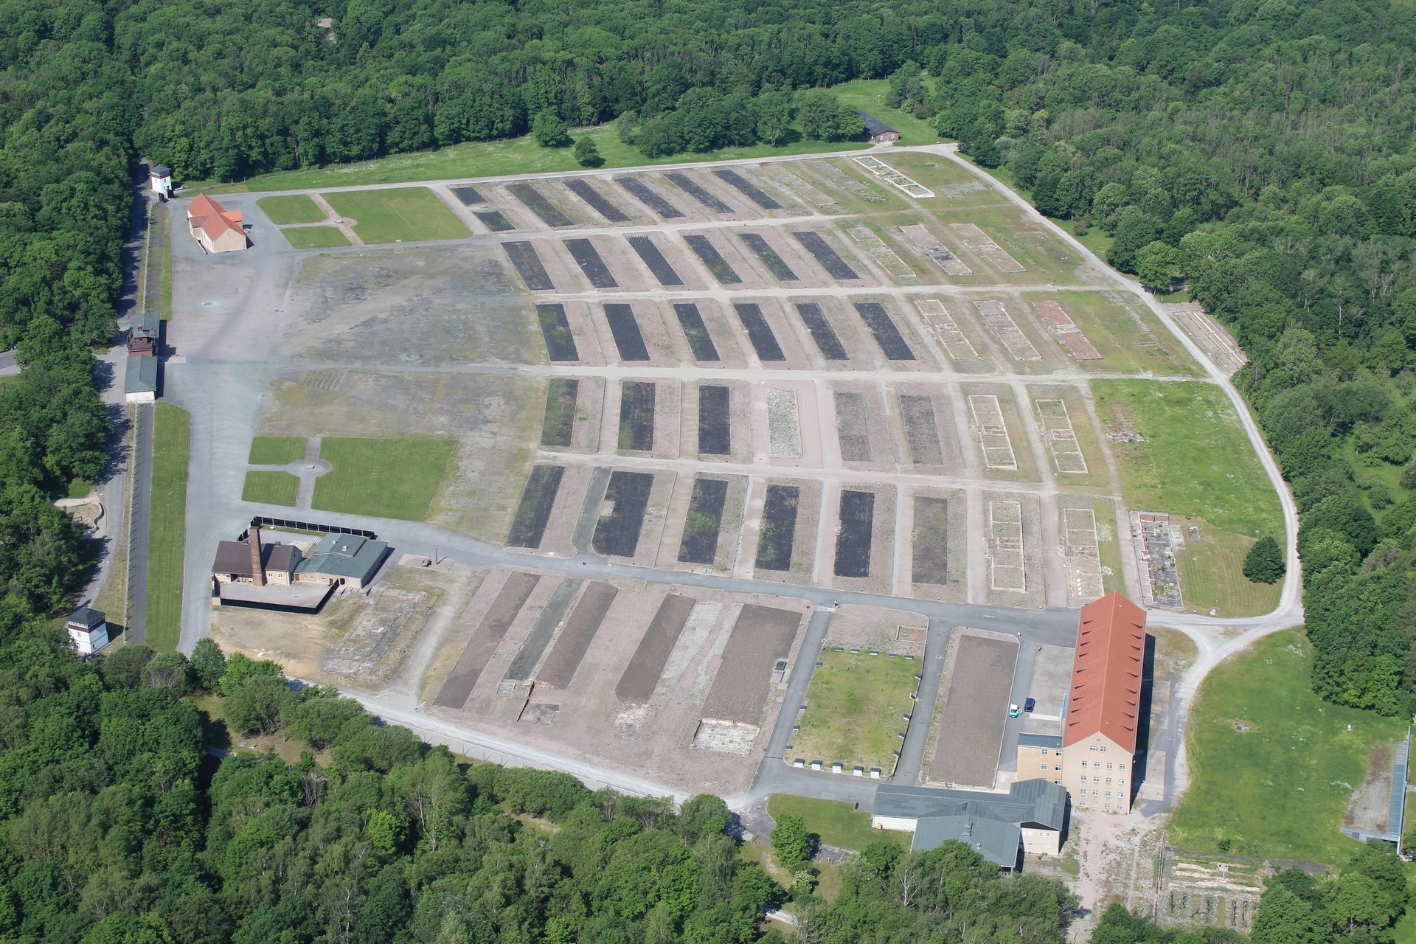 Aerial view of the former prisoner camp. Dark areas mark the ground plans of the barracks. Few buildings are still standing. Forest all around.